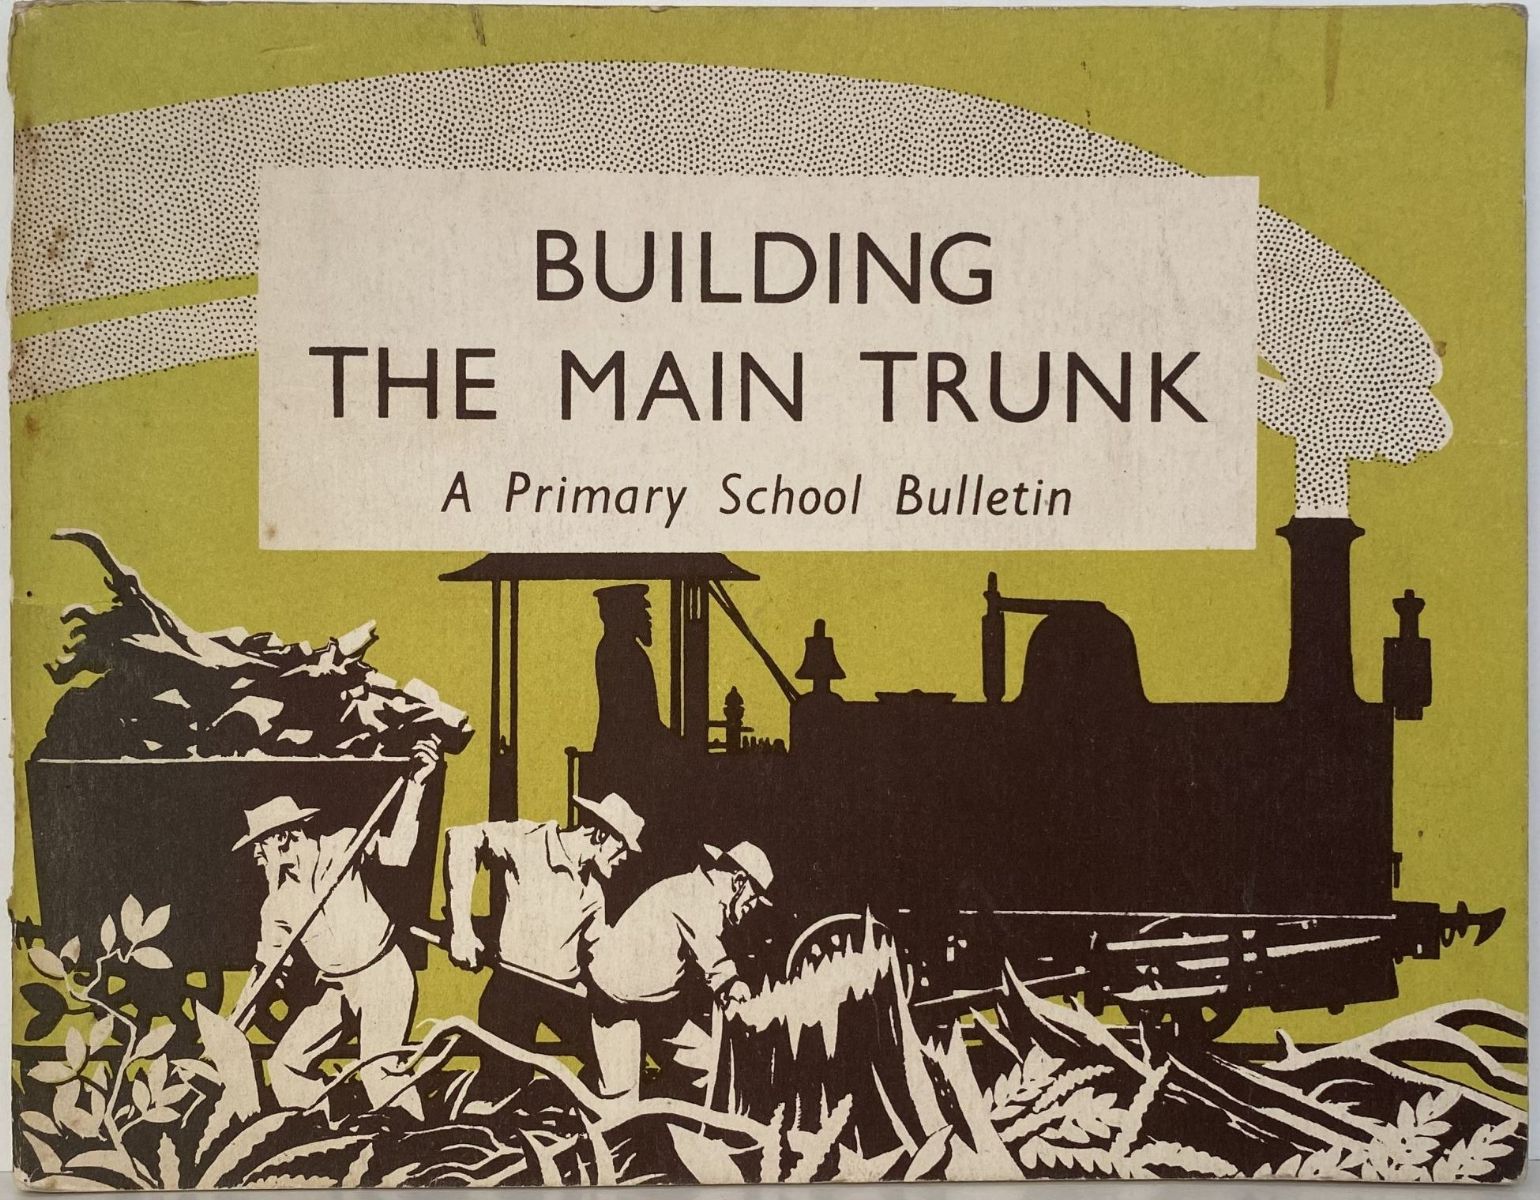 BUILDING THE MAIN TRUNK: A Primary School Bulletin